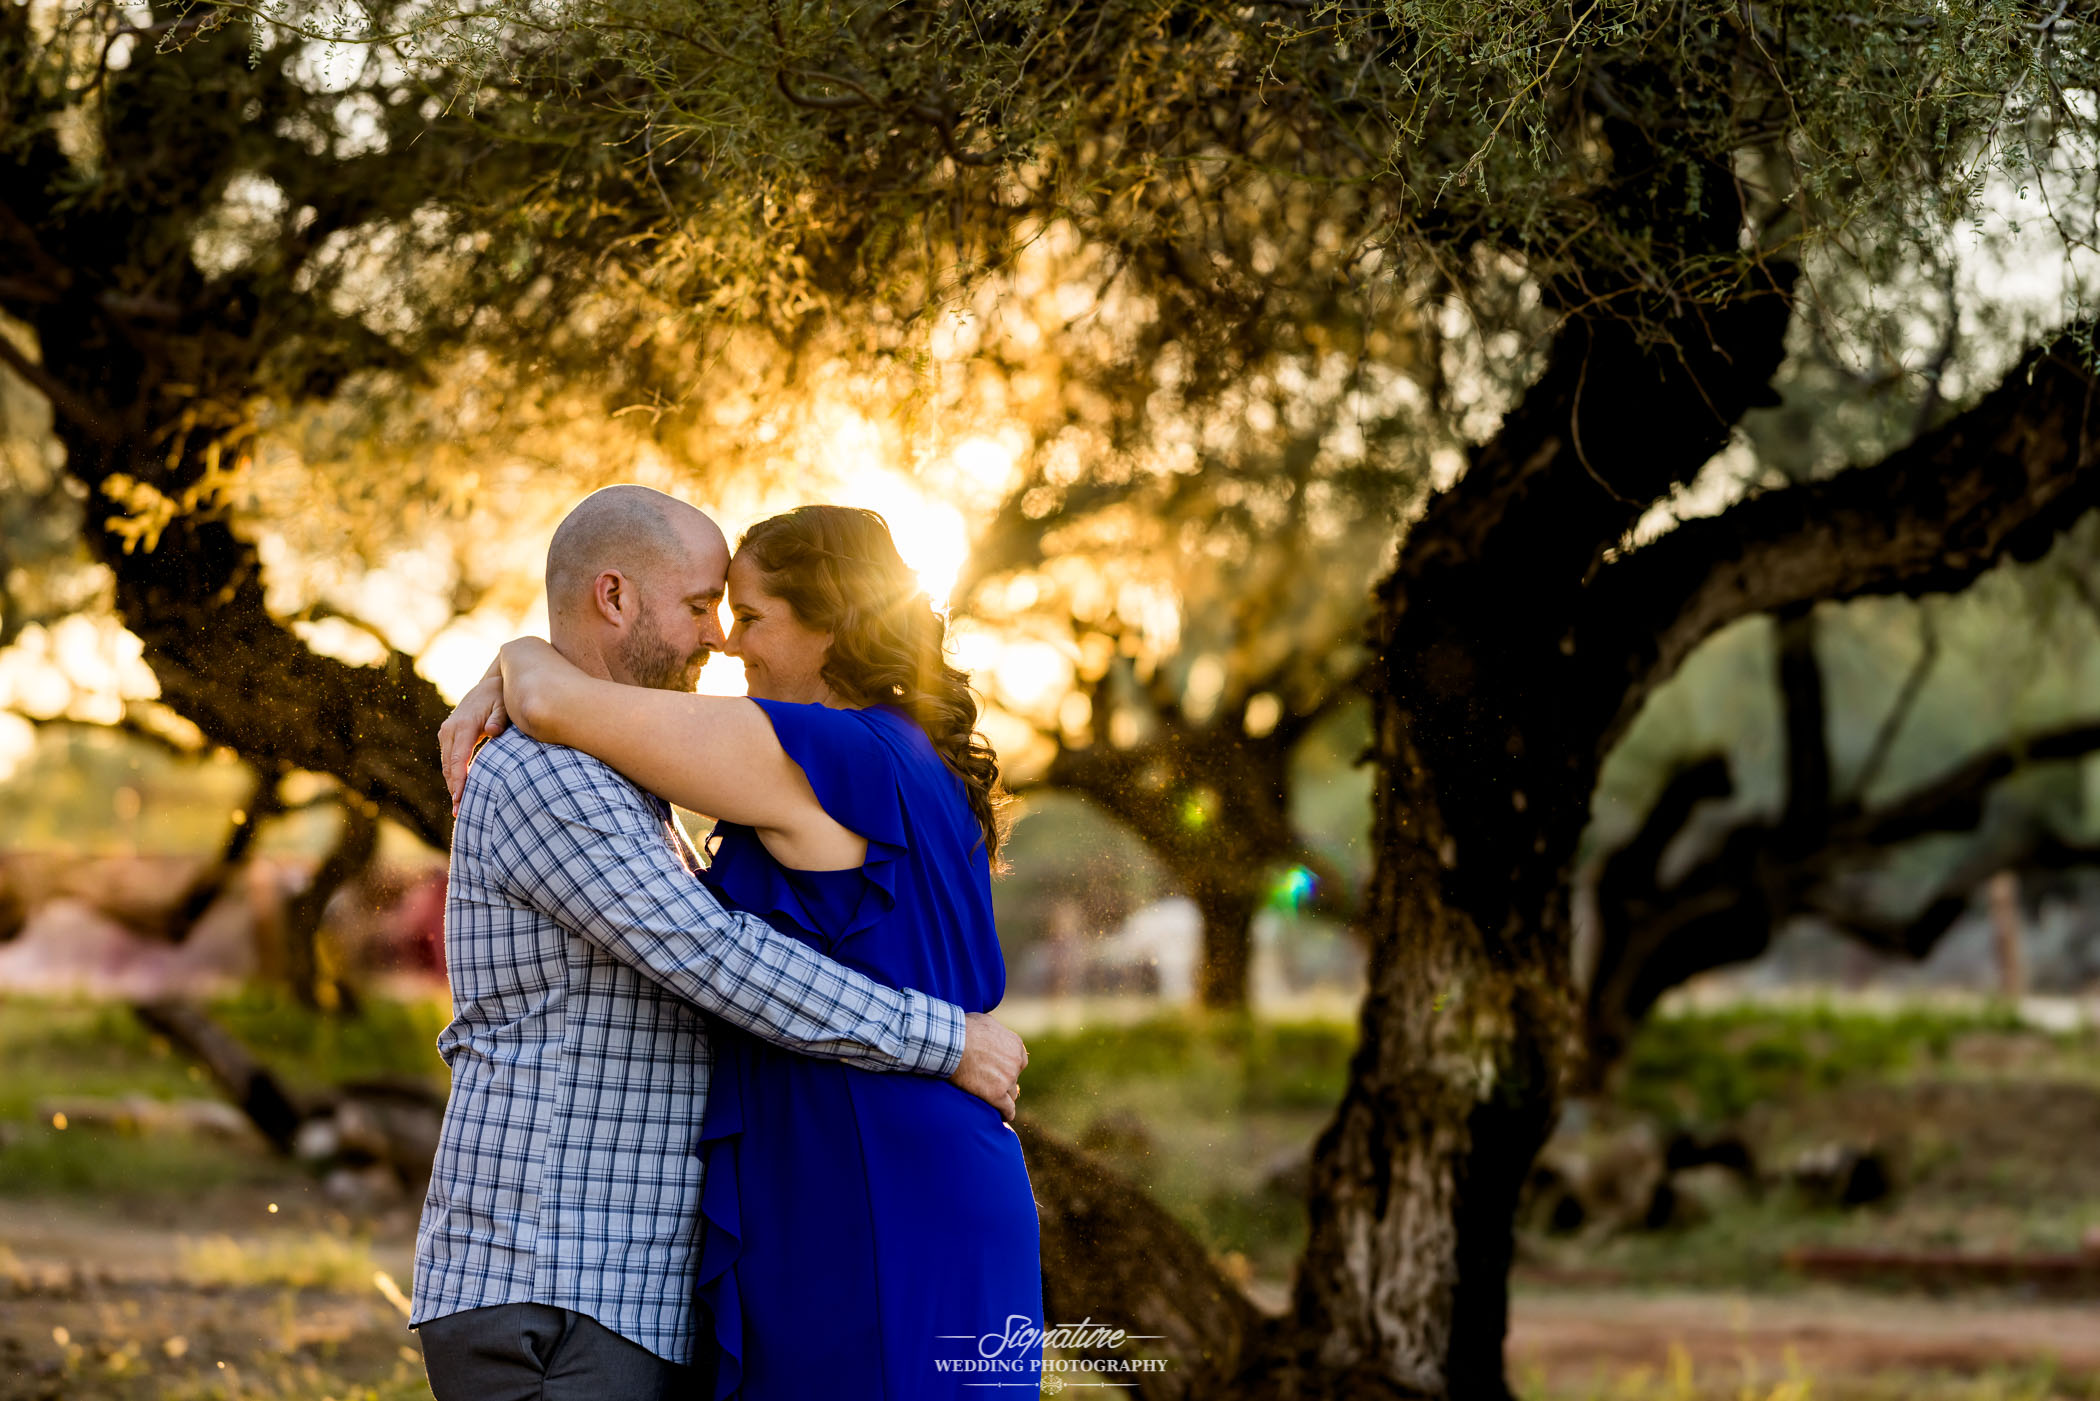 Couple with arms around each other in front of tree at sunset